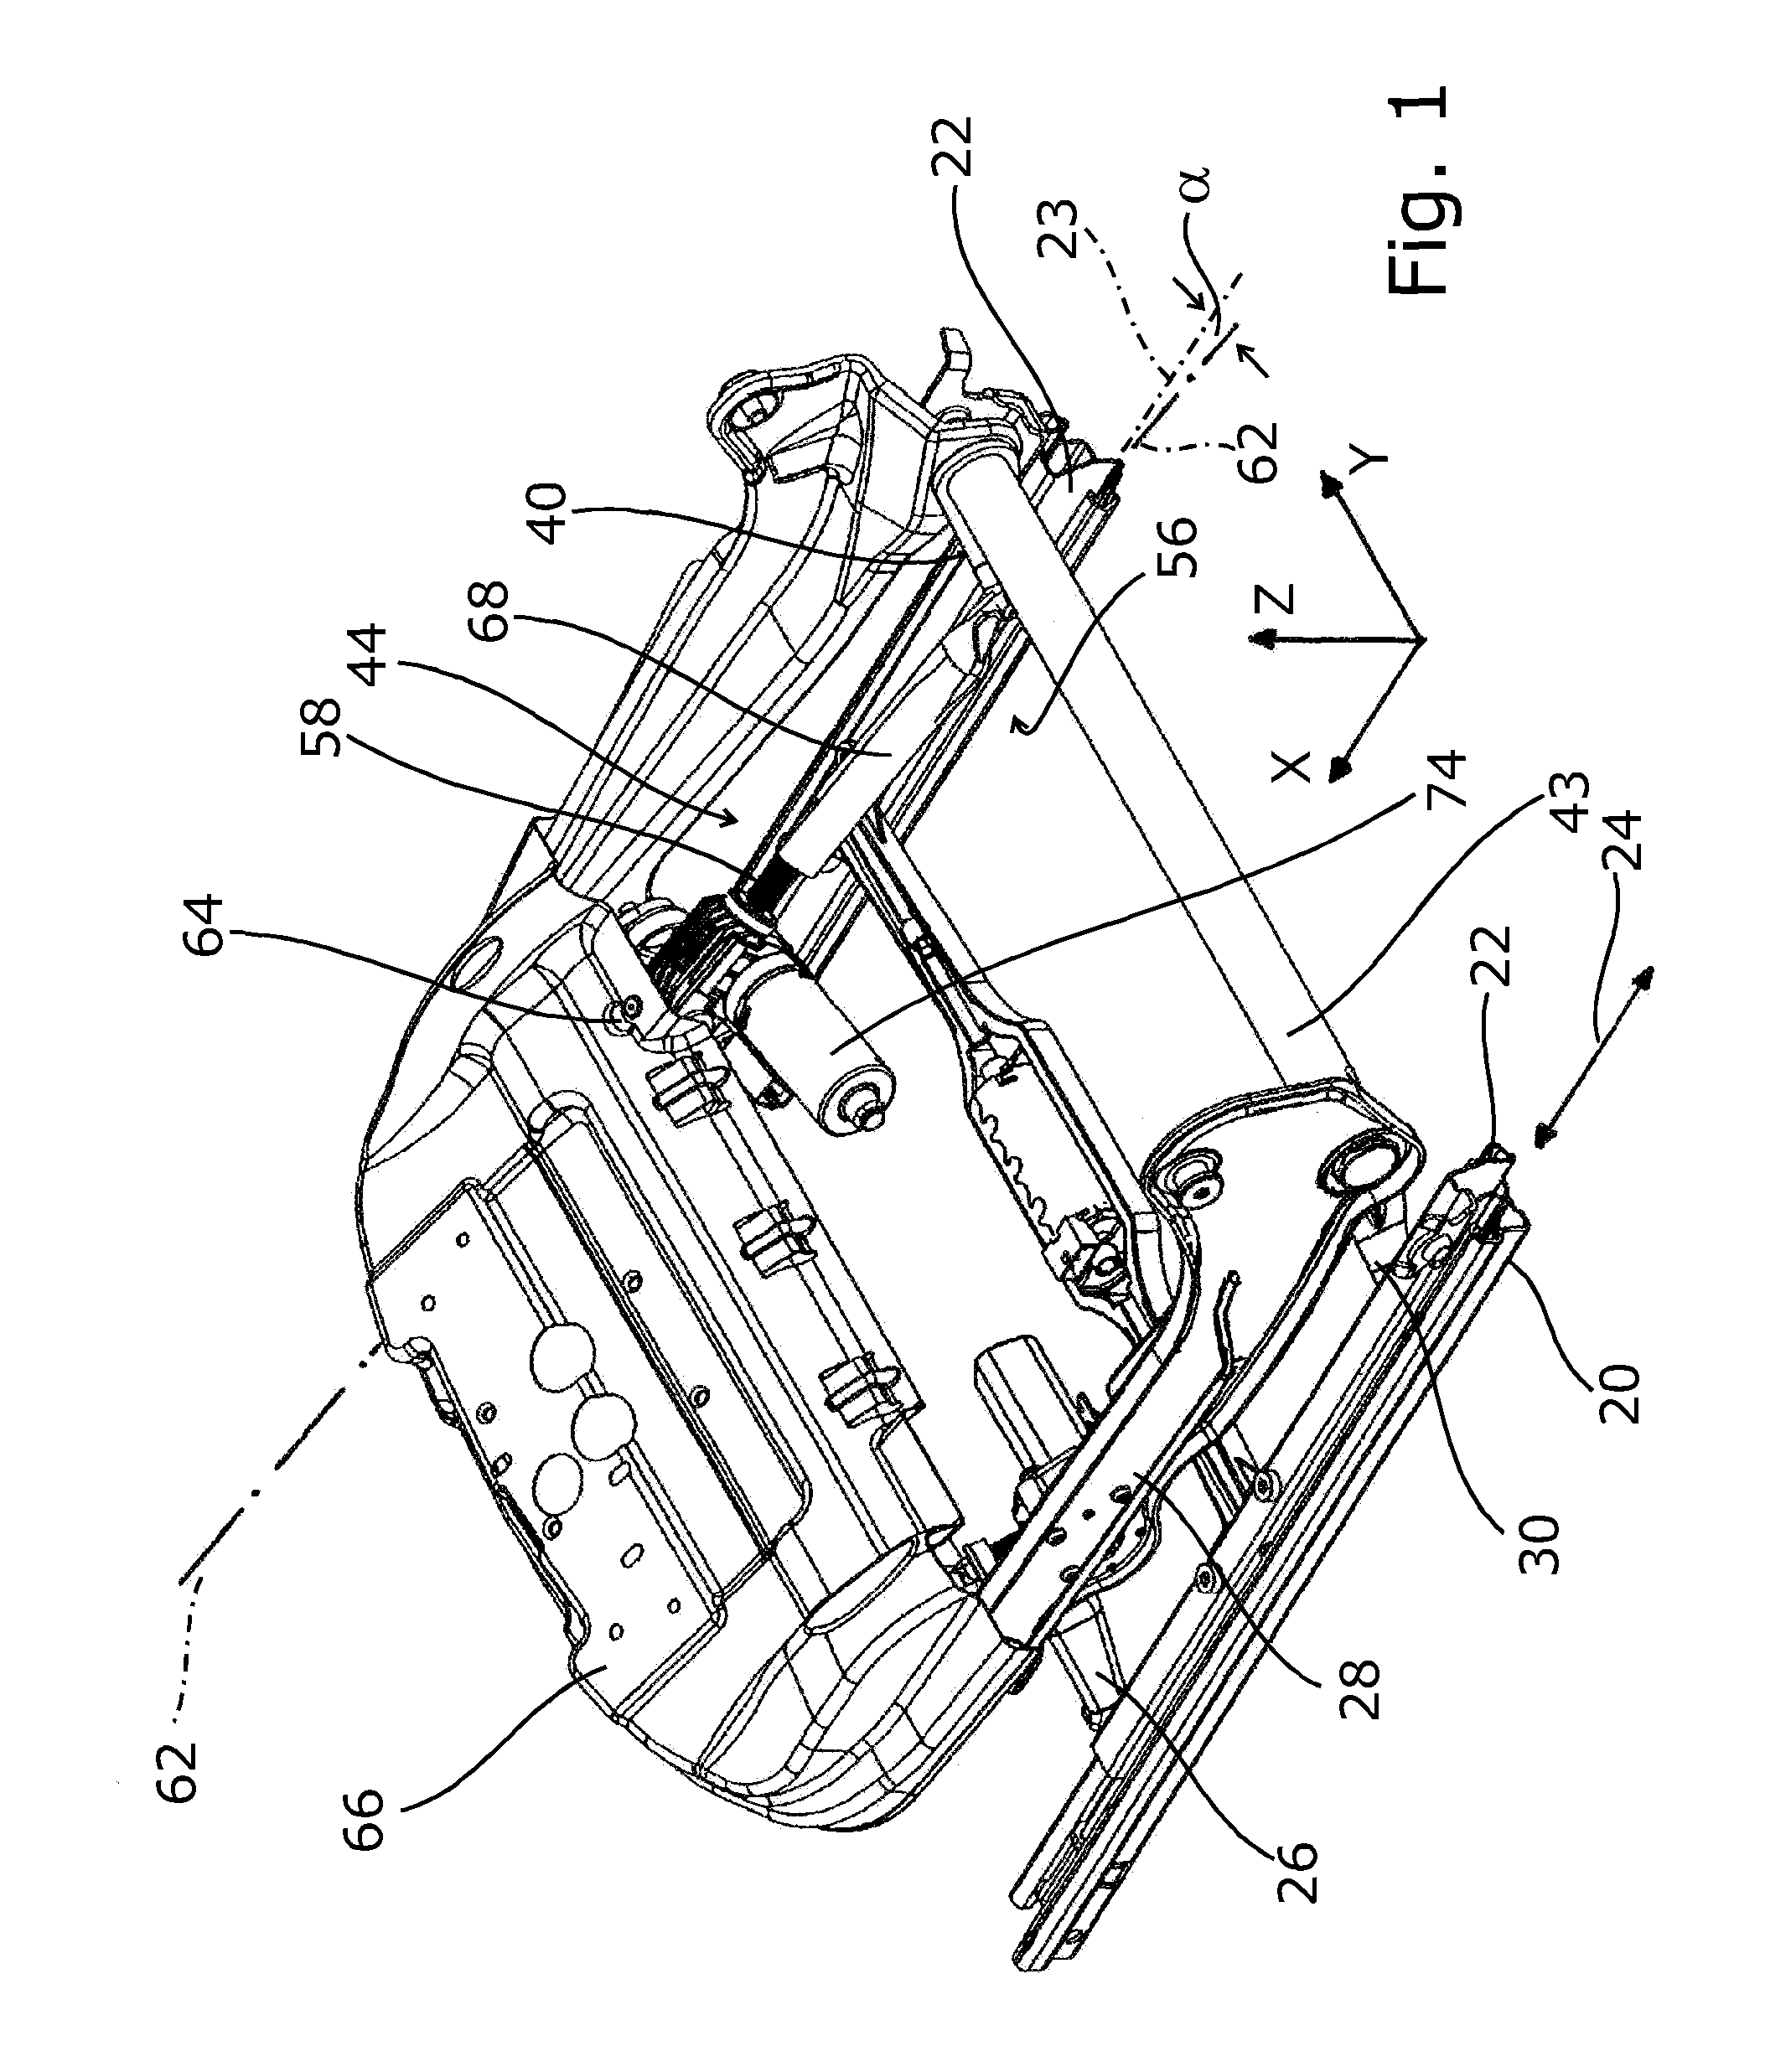 Height-adjustable motor vehicle seat with a spindle drive